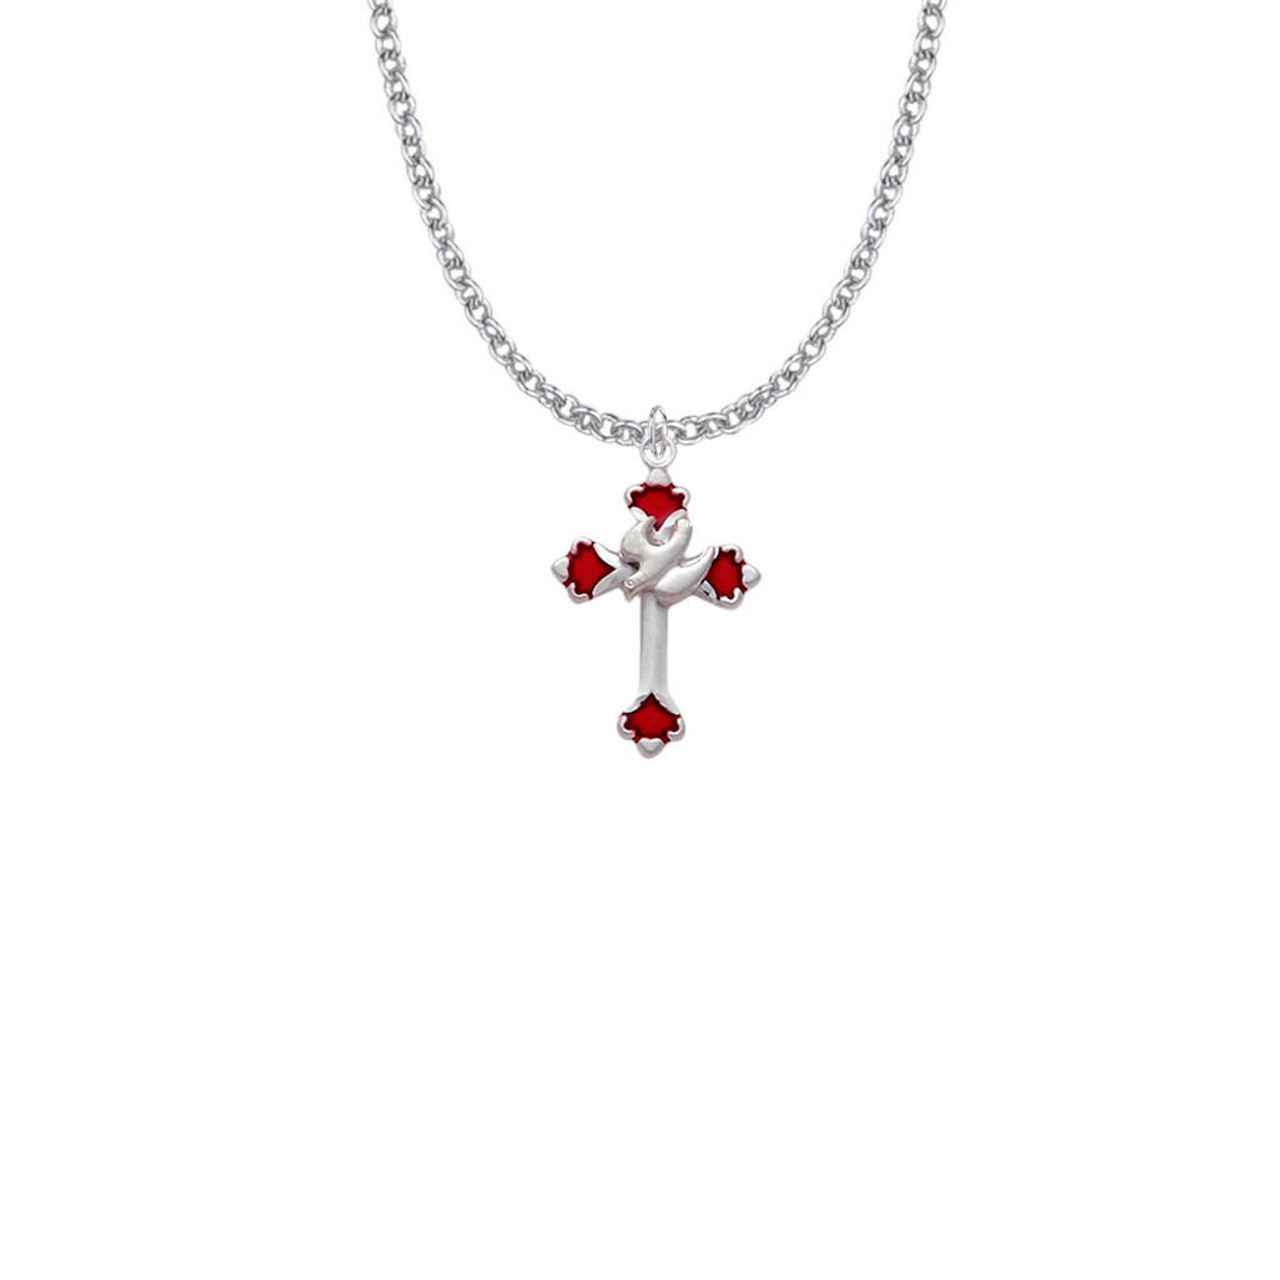 Enameled Red Ends Dove Cross Necklace - Sterling Silver Pendant On 18